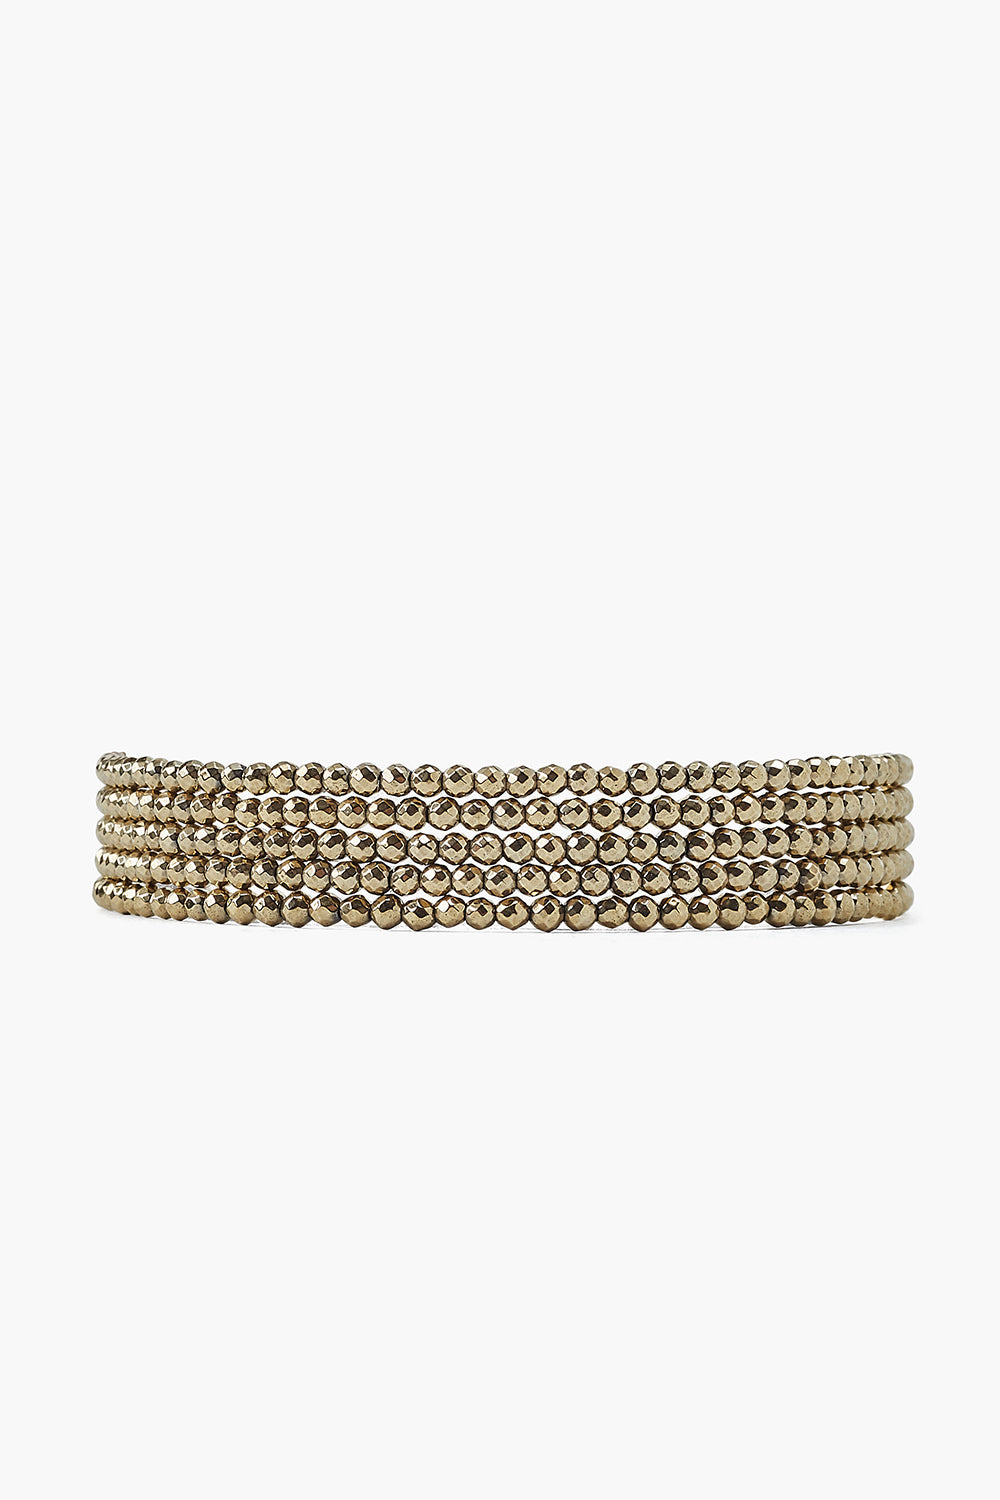 PYRITE BEADED 5 LAYER BRACELET - Kingfisher Road - Online Boutique